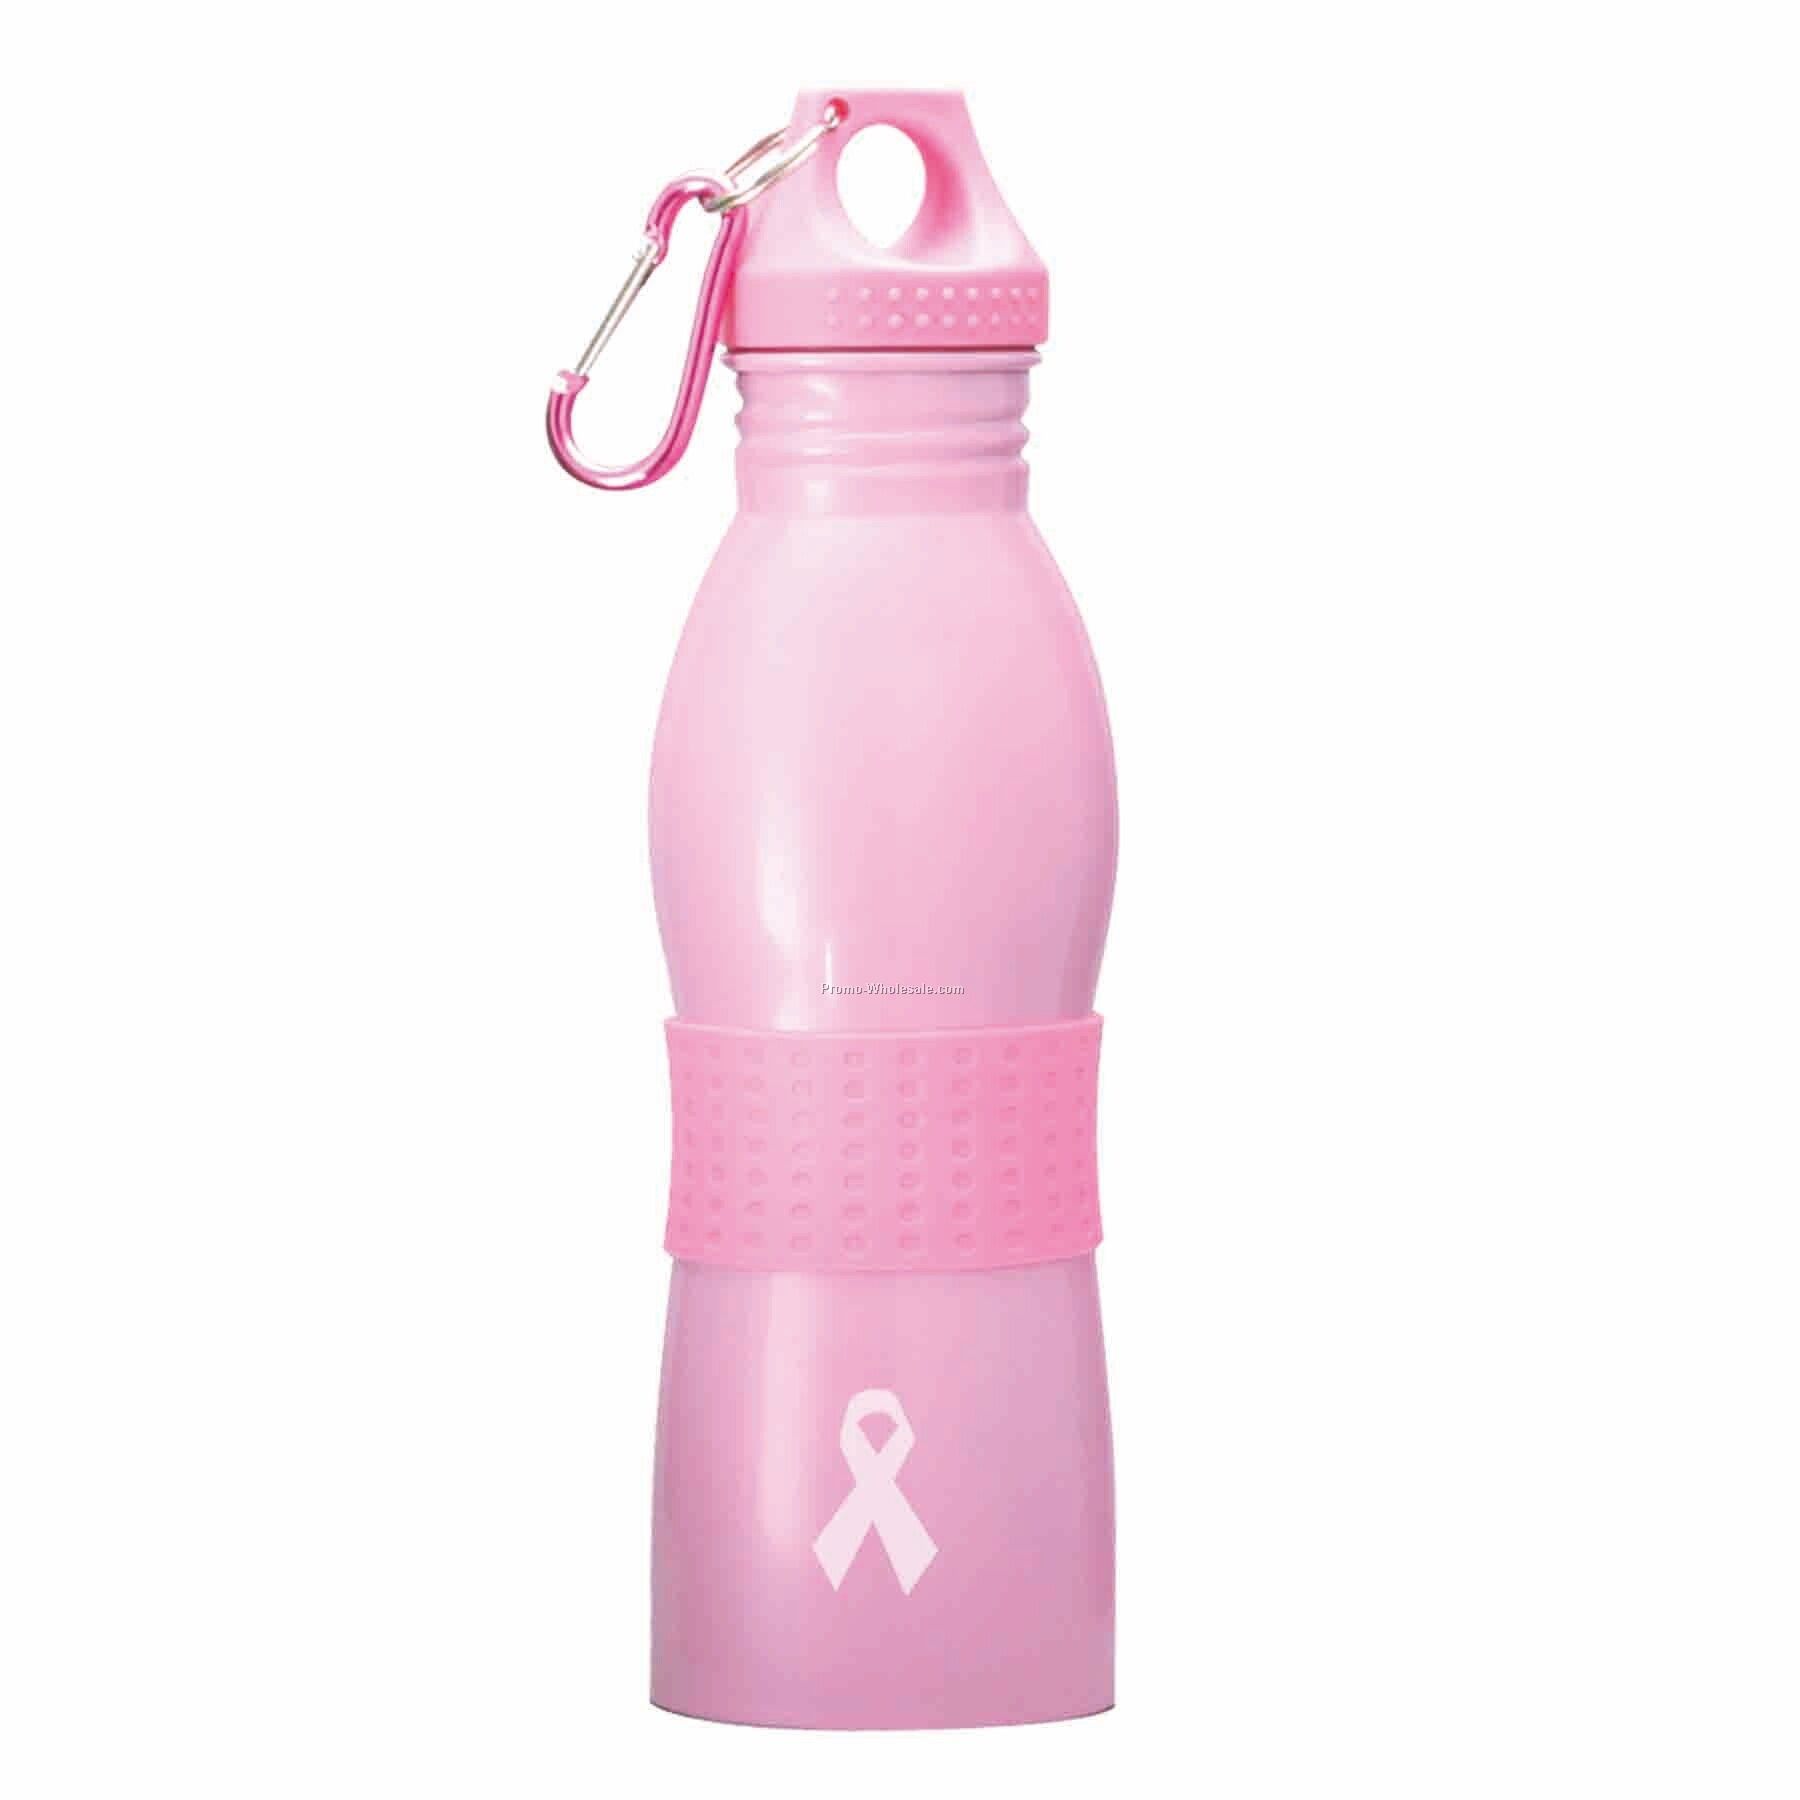 20 Oz Stainless Steel Bottle, Pink